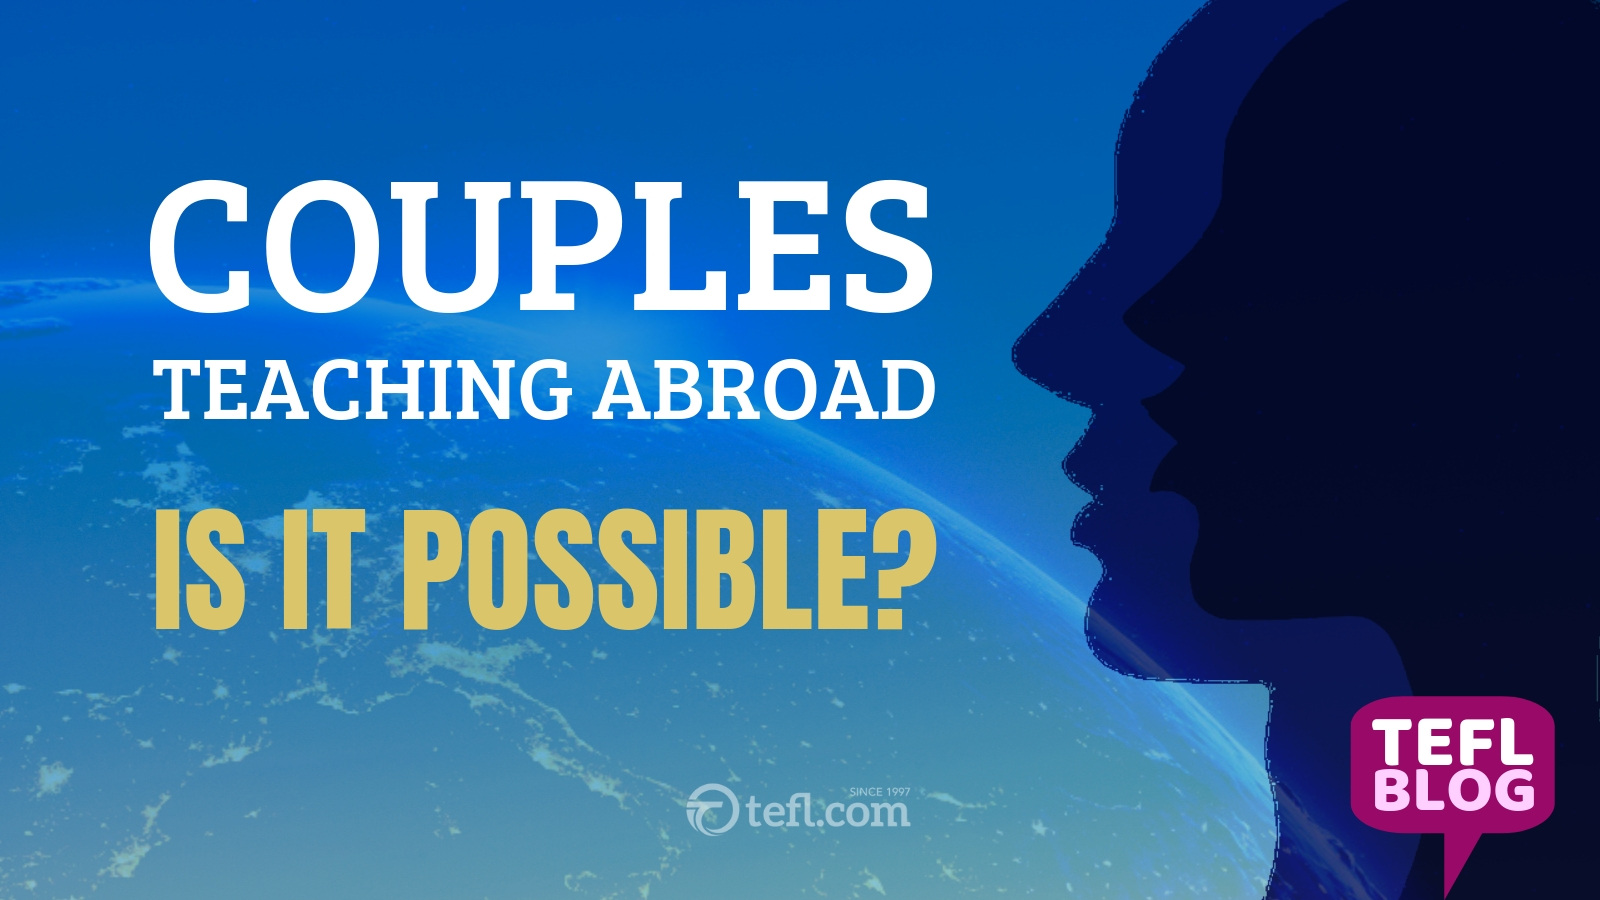 Couples teaching abroad - is it possible?